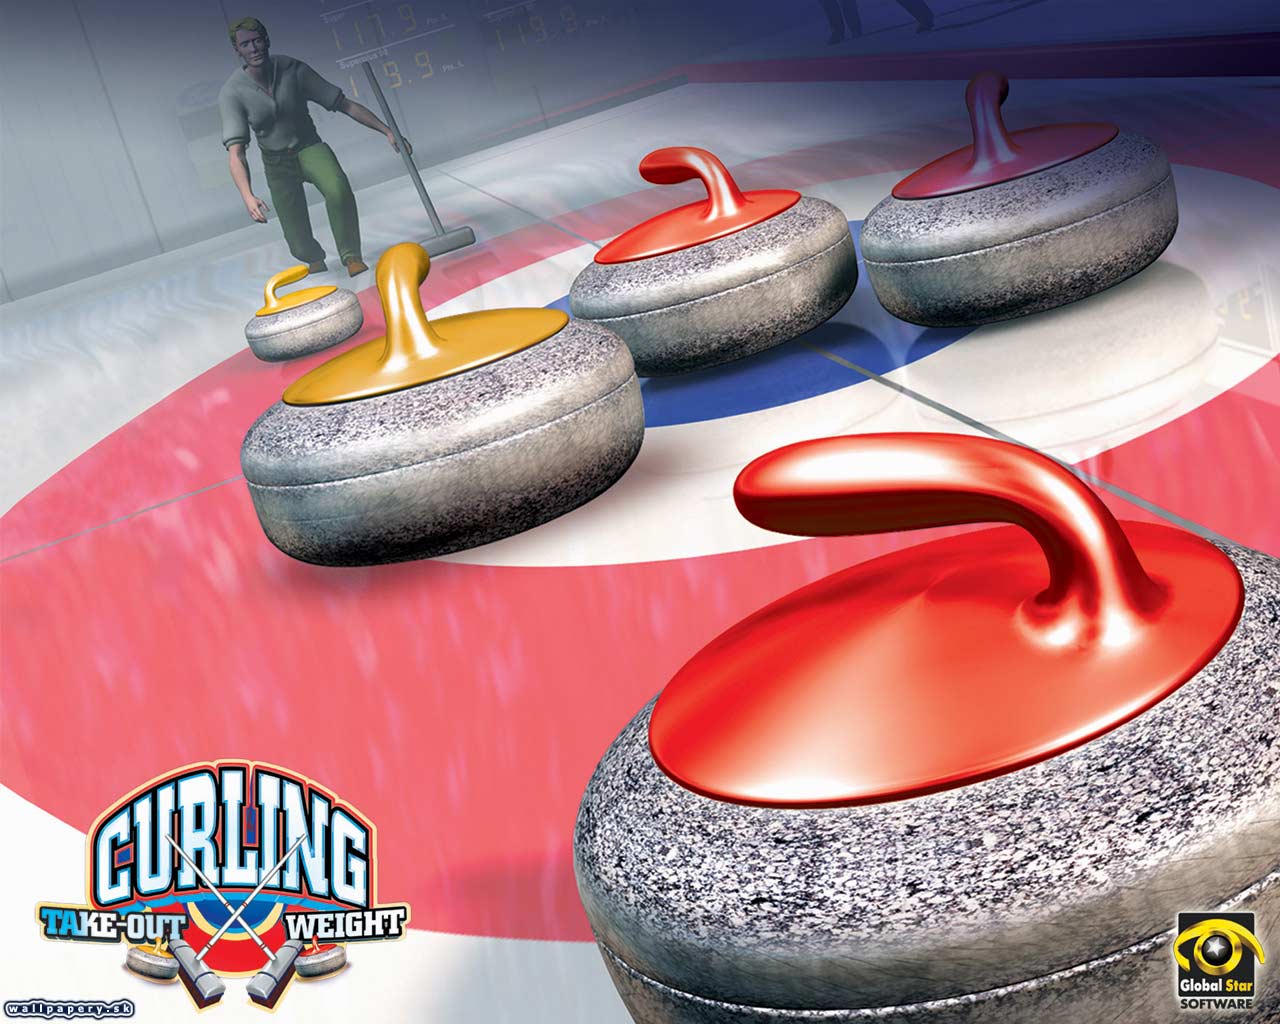 Take Out Weight Curling - wallpaper 1